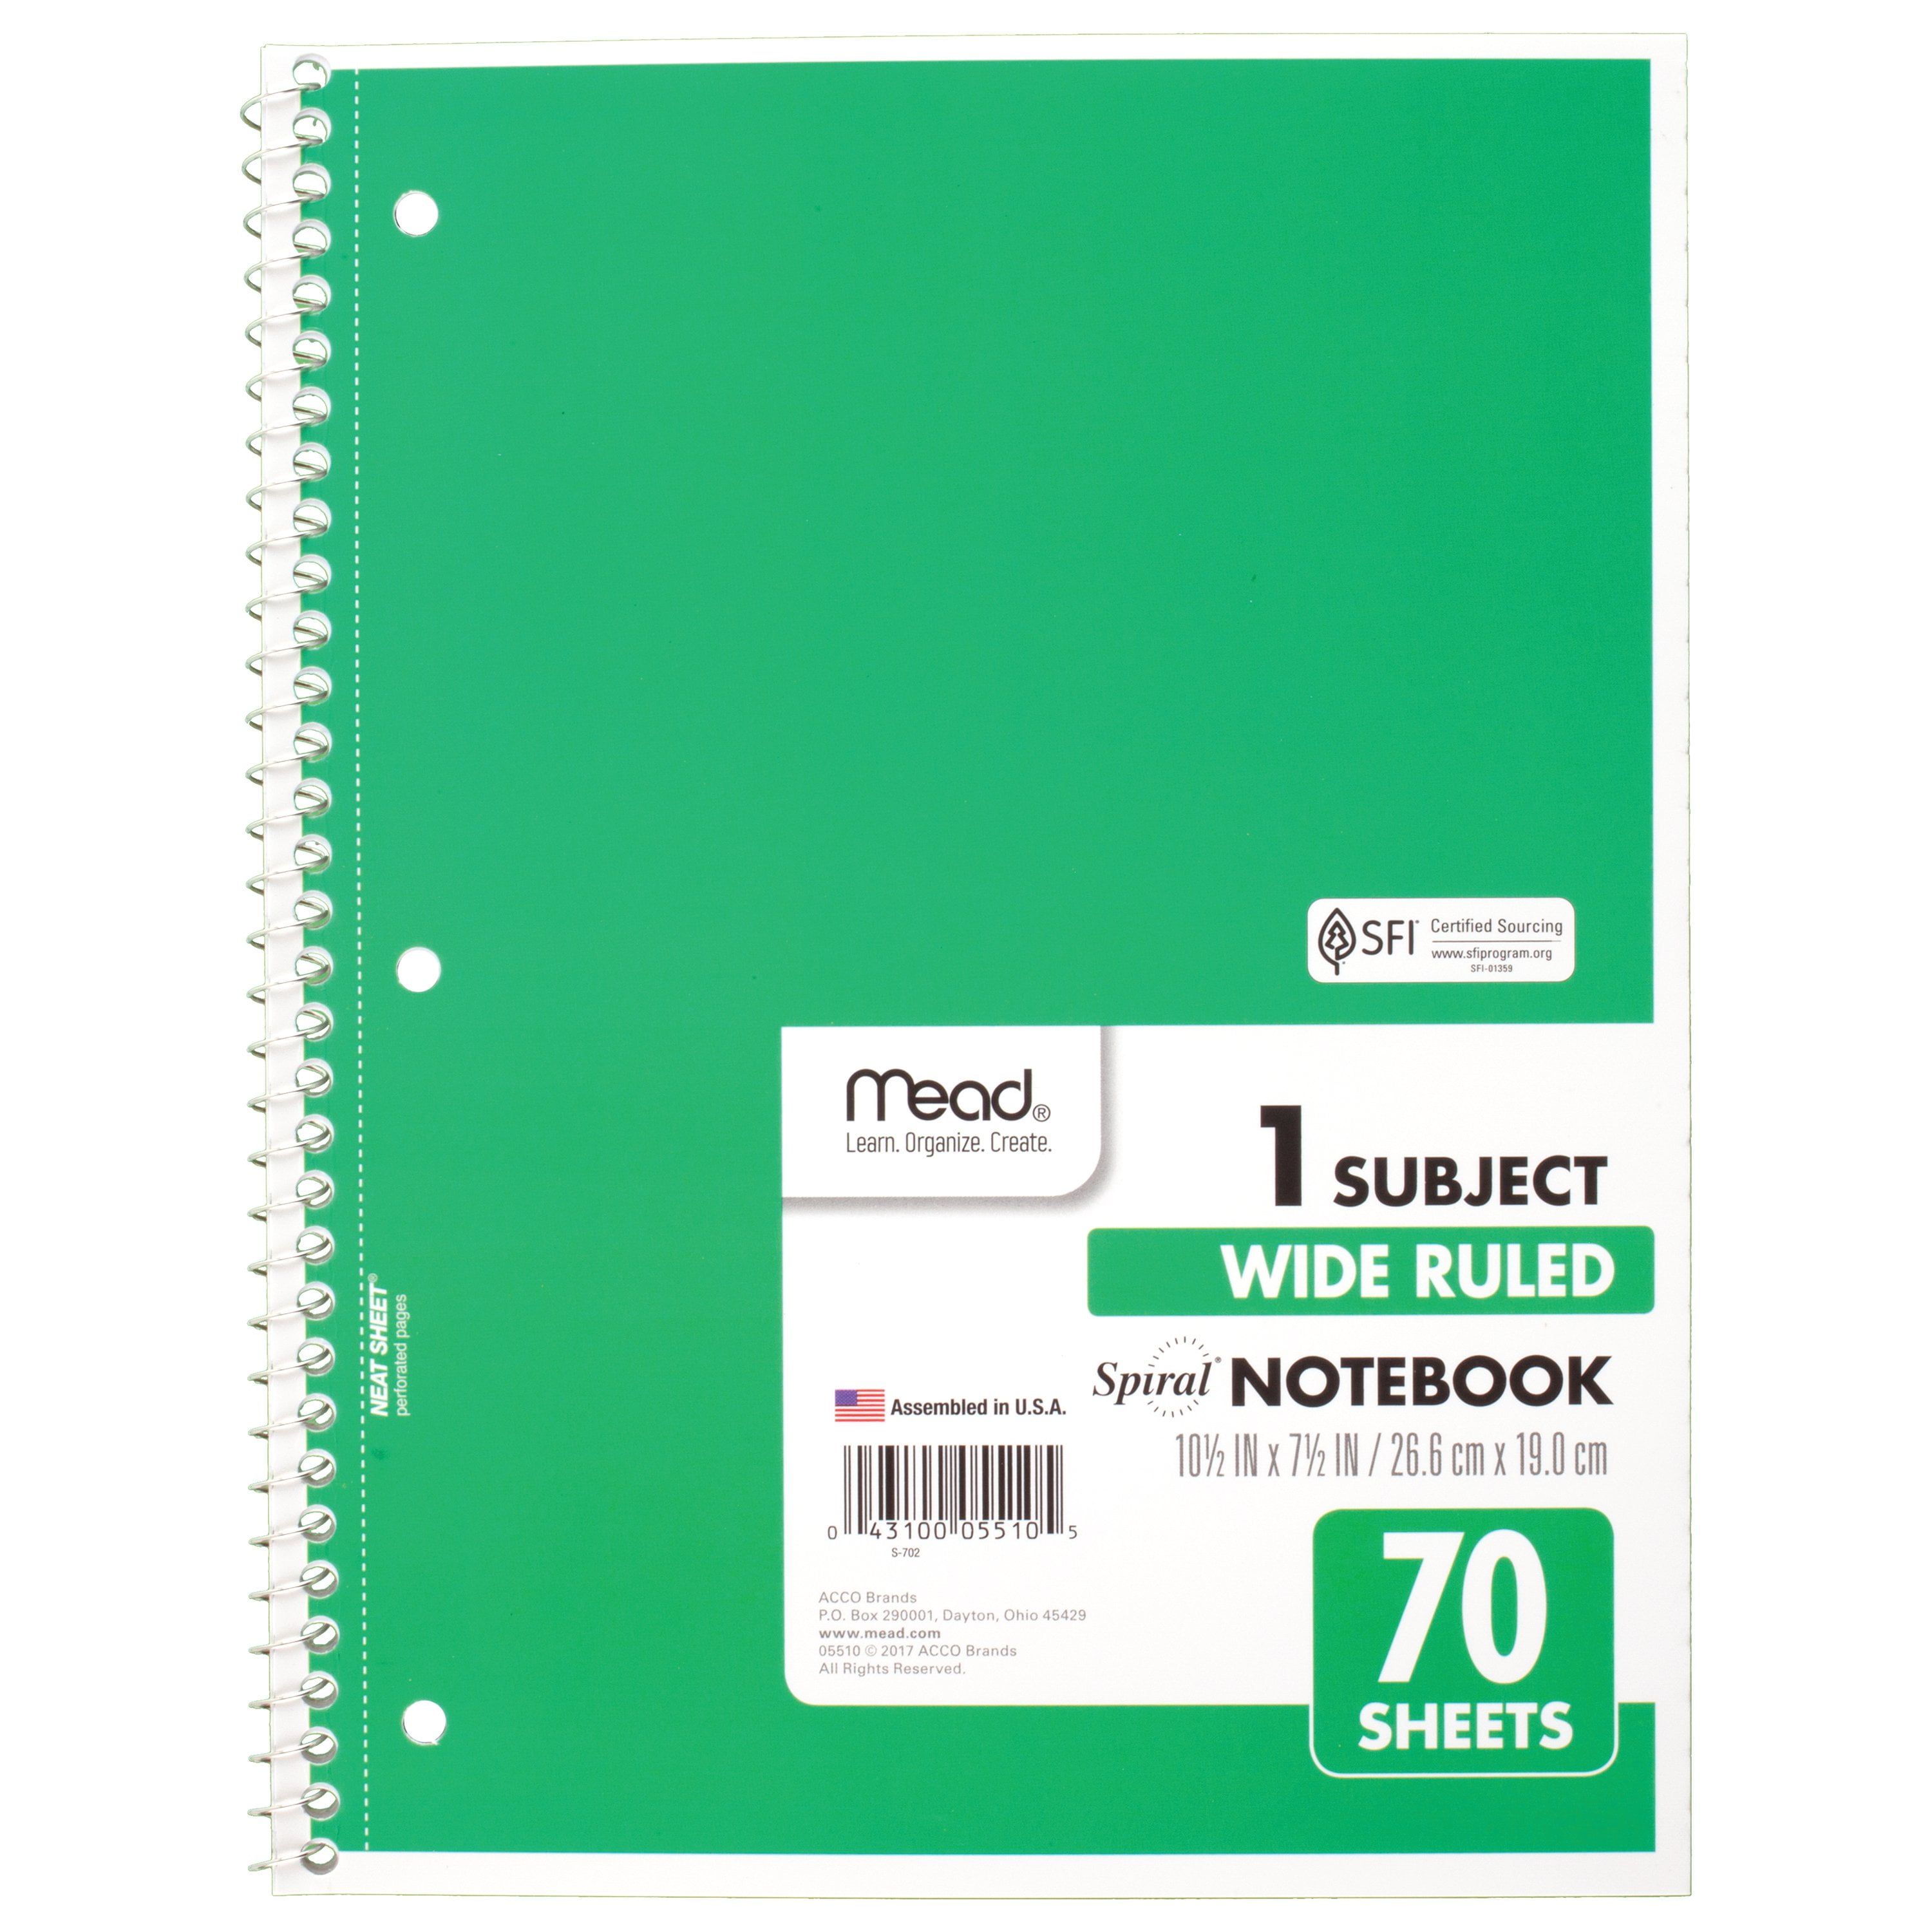 Mead Spiral Notebook, 1 Subject, Wide Ruled, 70 Sheets